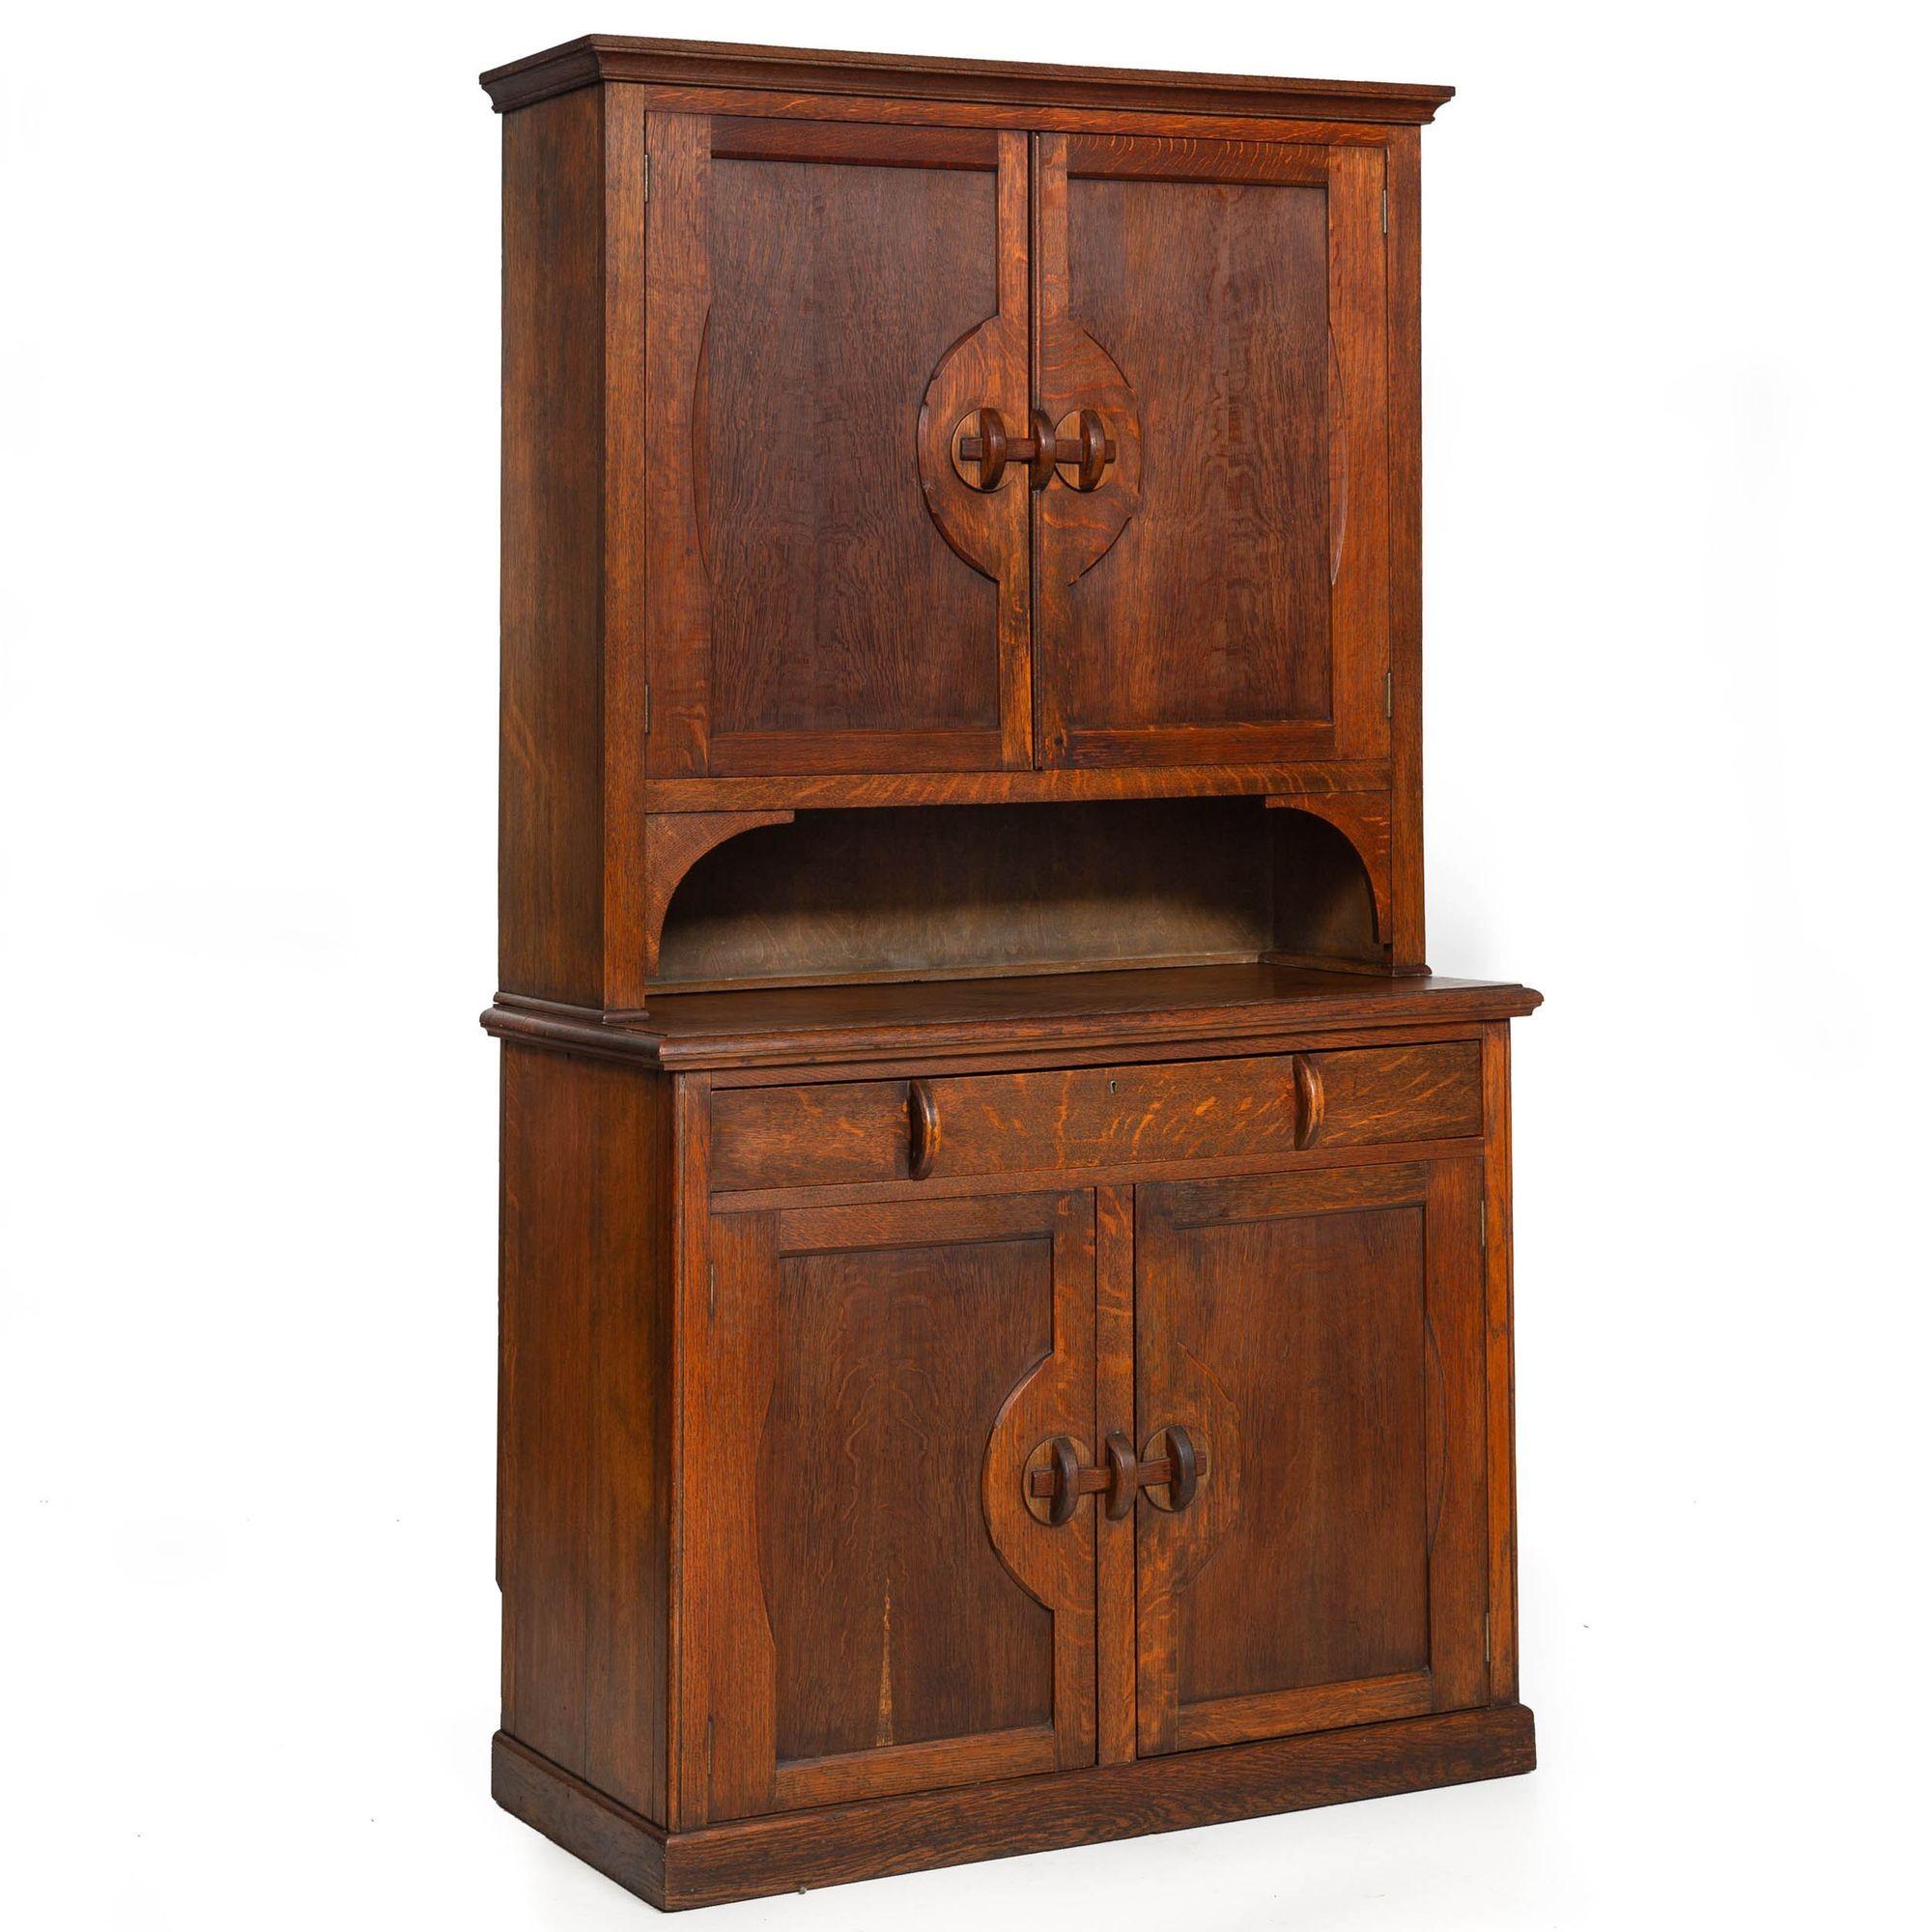 ENGLISH ARTS & CRAFTS OAK TWO-PART CUPBOARD
With a step-back form  clever carved wood latching mechanisms  circa 1920
Item # 403PPK18Q

This is such a fun step-back cupboard. We are particularly taken by the original hand-carved and shaped wooden